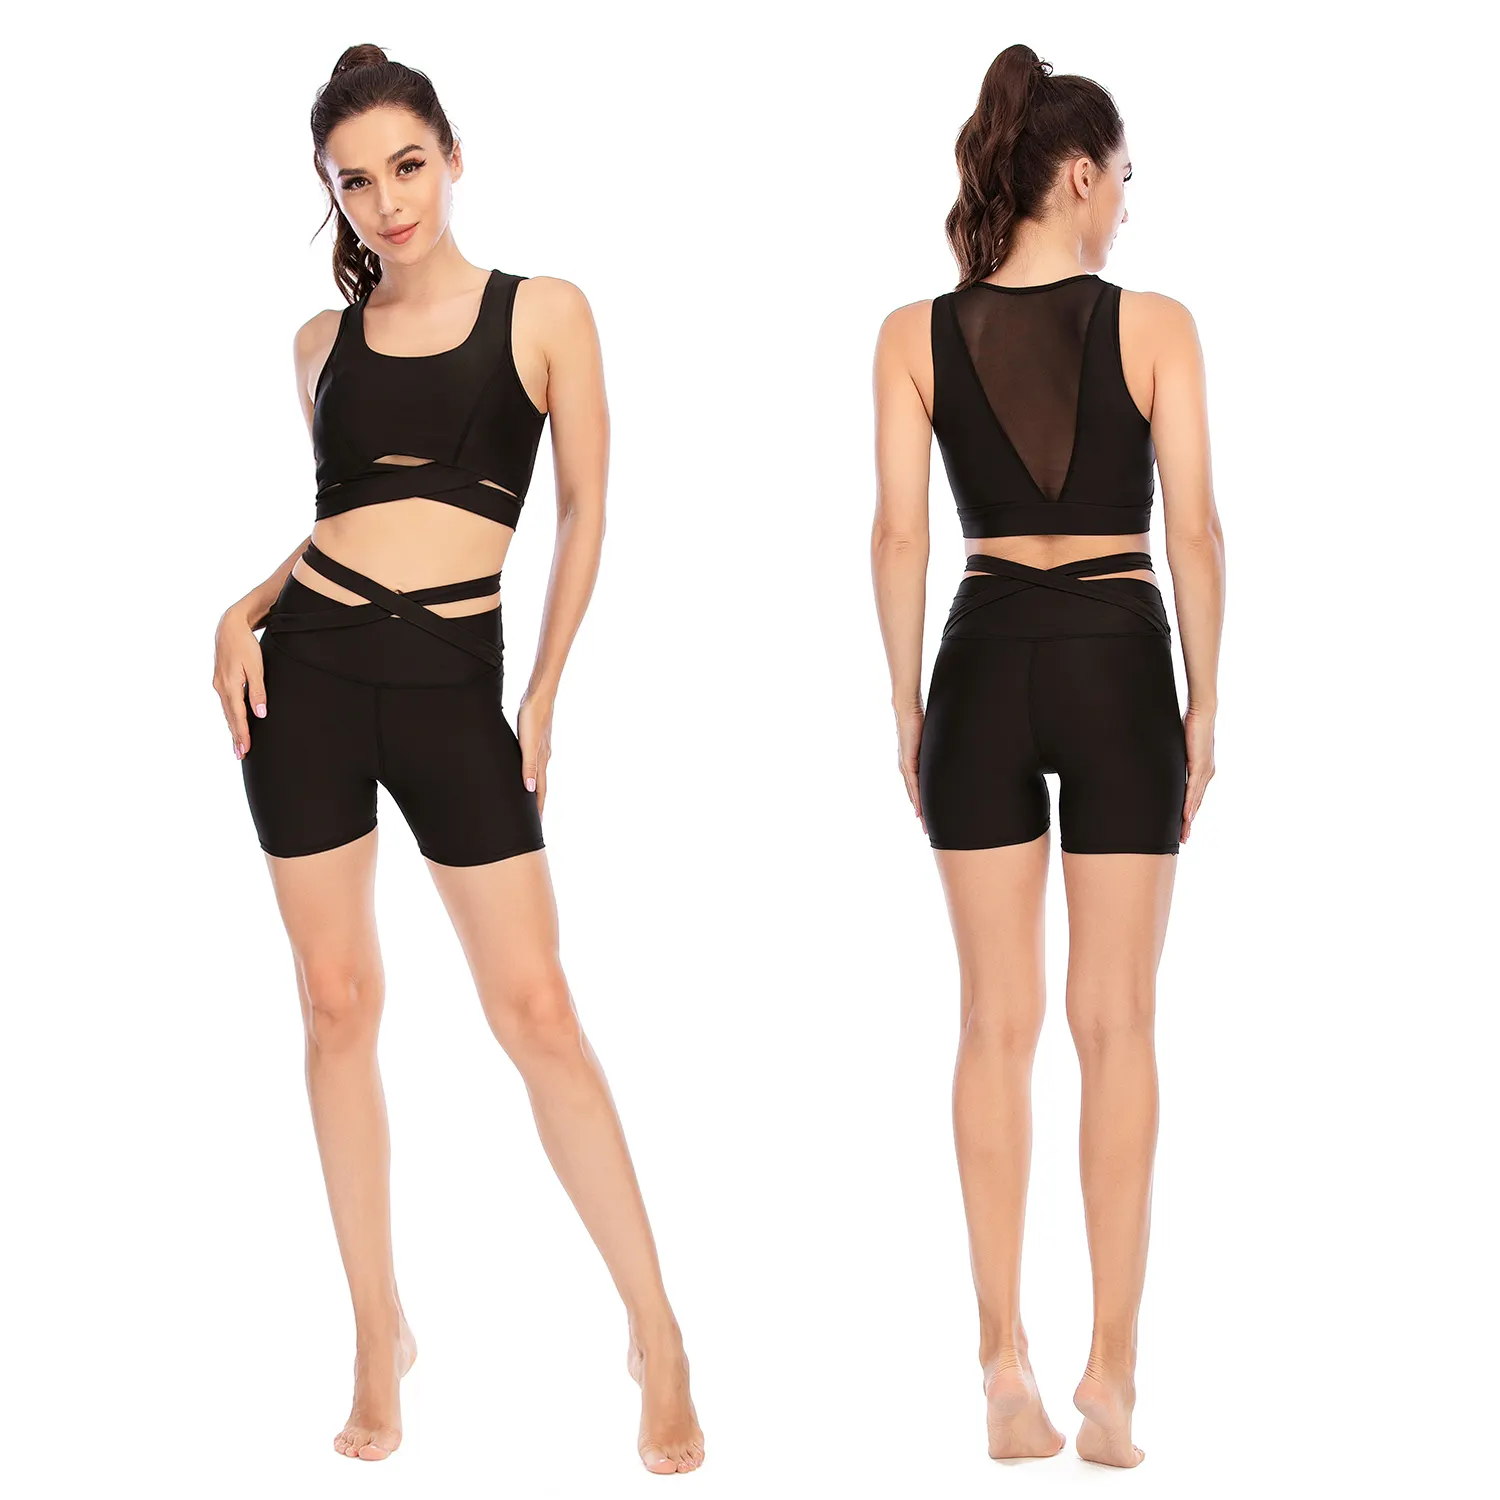 Womens Two Piece Outfits Tank Crop Top Shorts Set Short Suits Sports Yoga Short V cross Waist pants and Top Bra